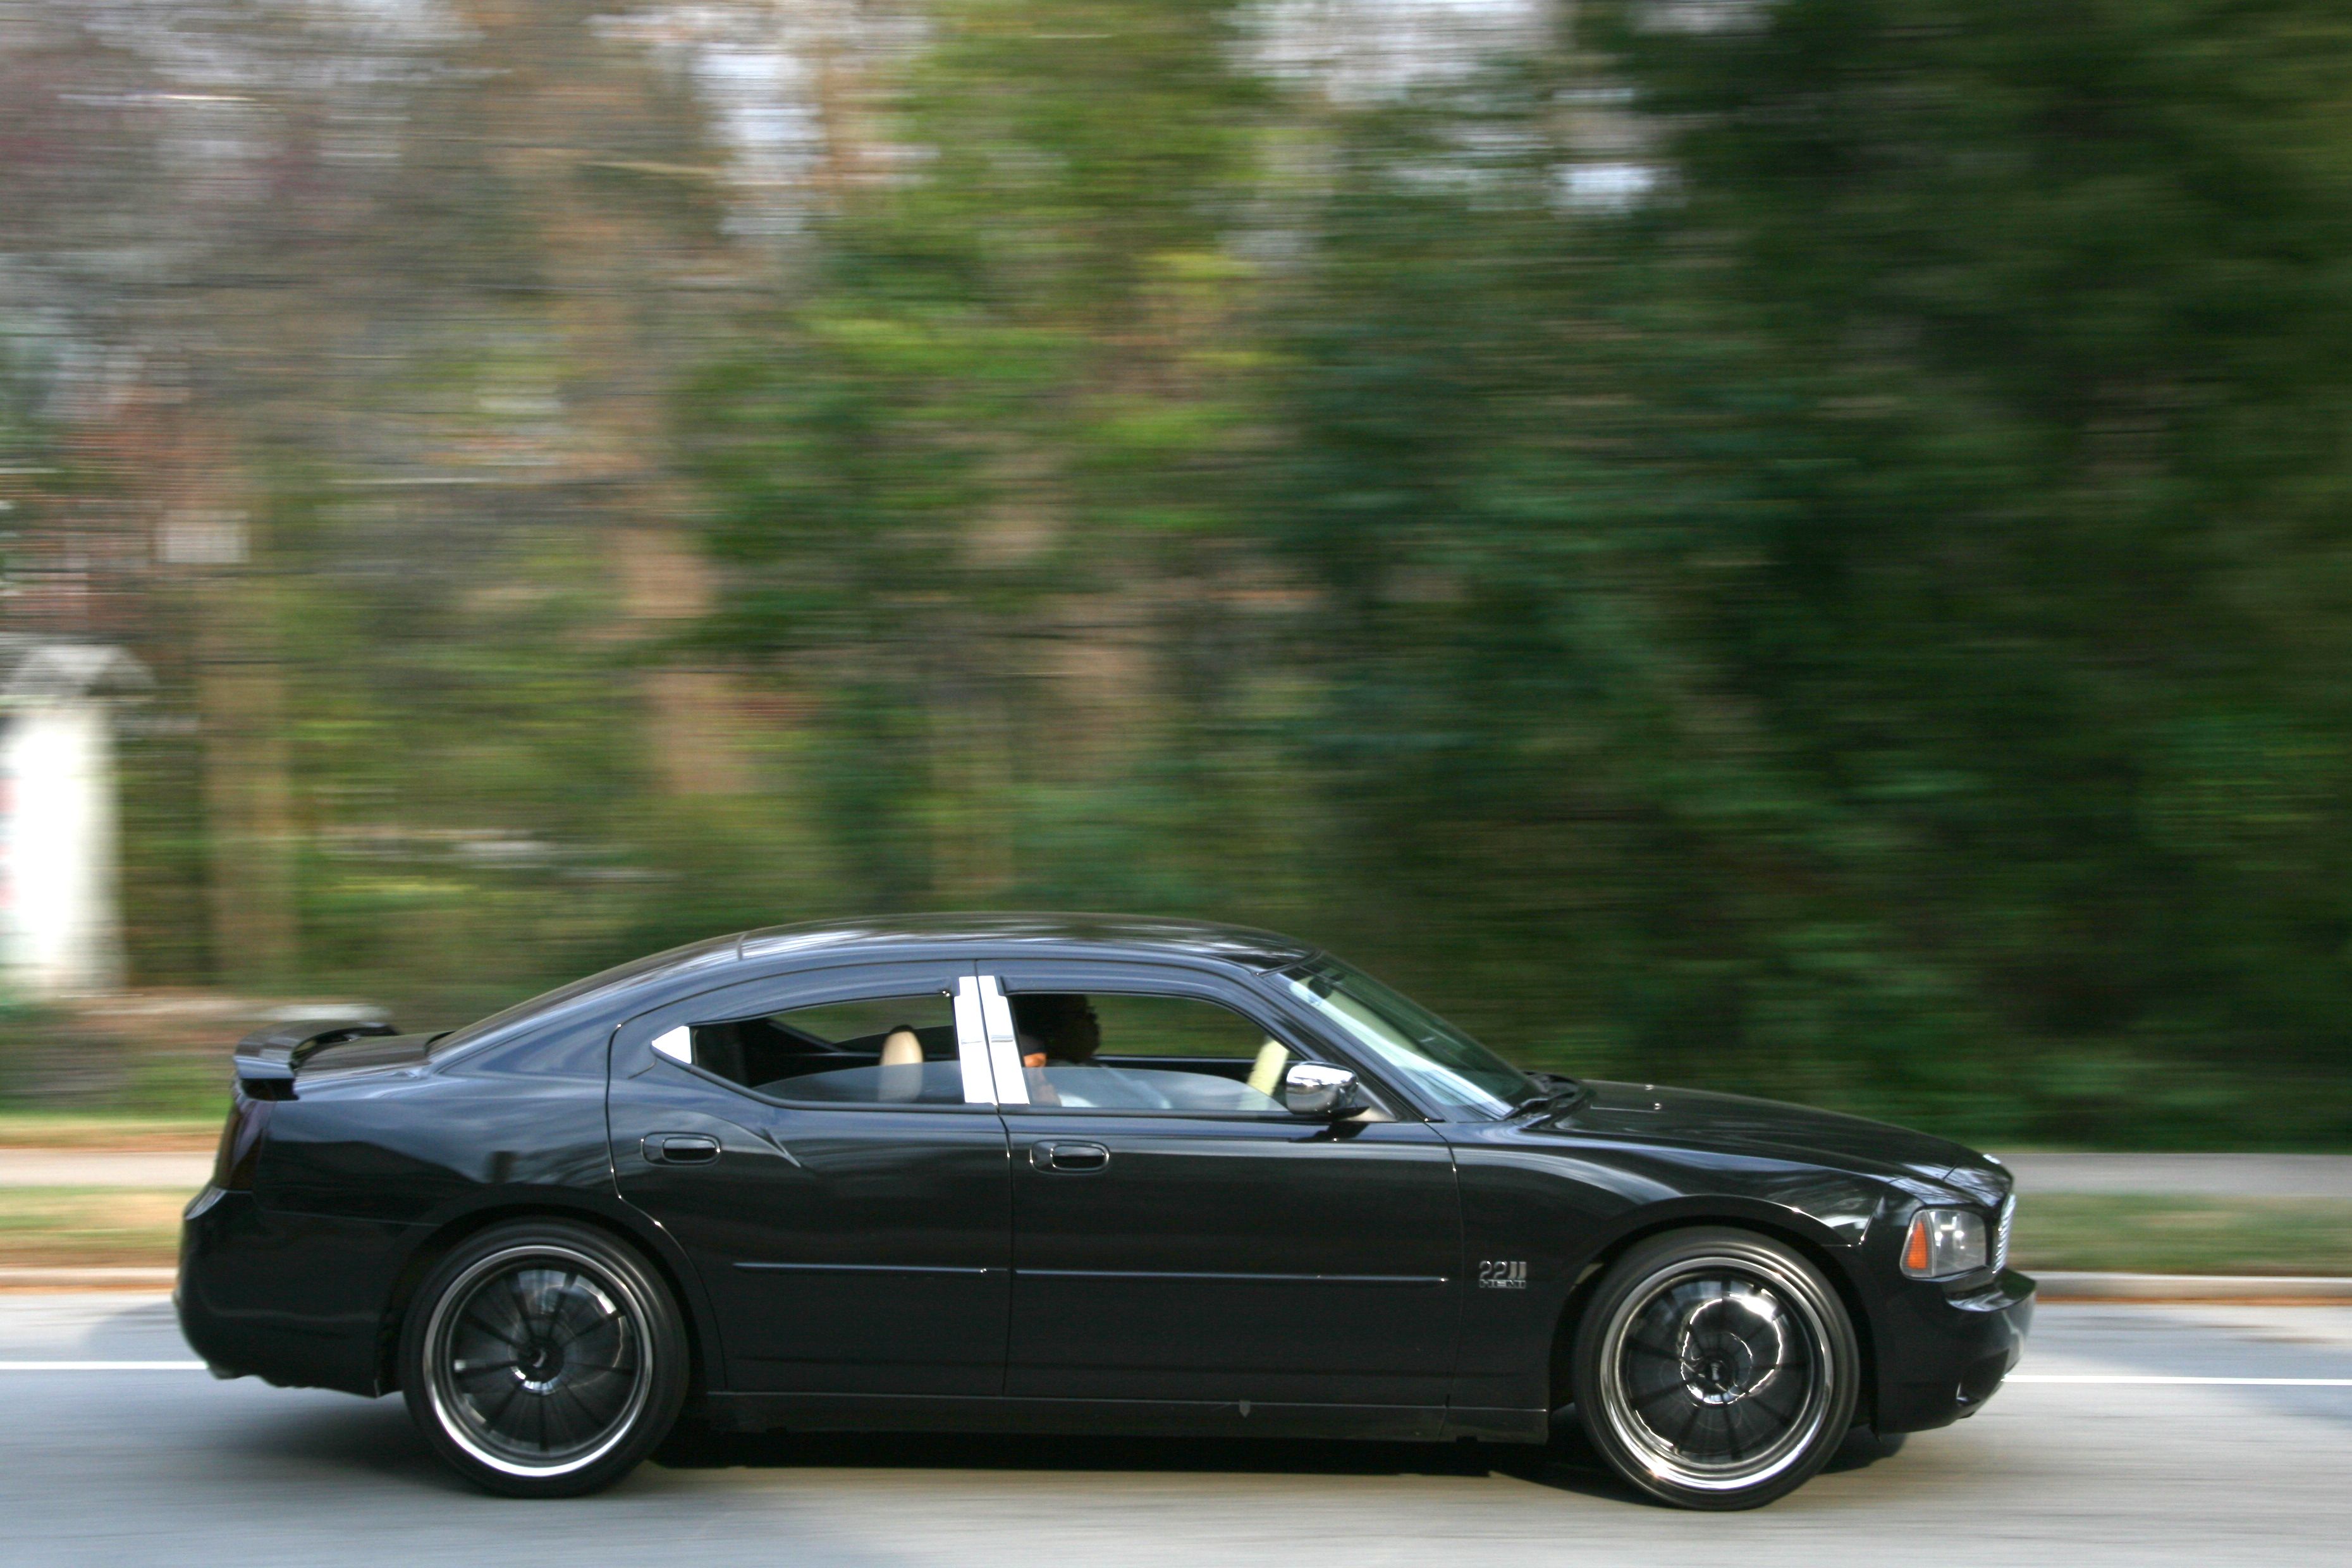 2009 Dodge Charger: The iconic muscle car.